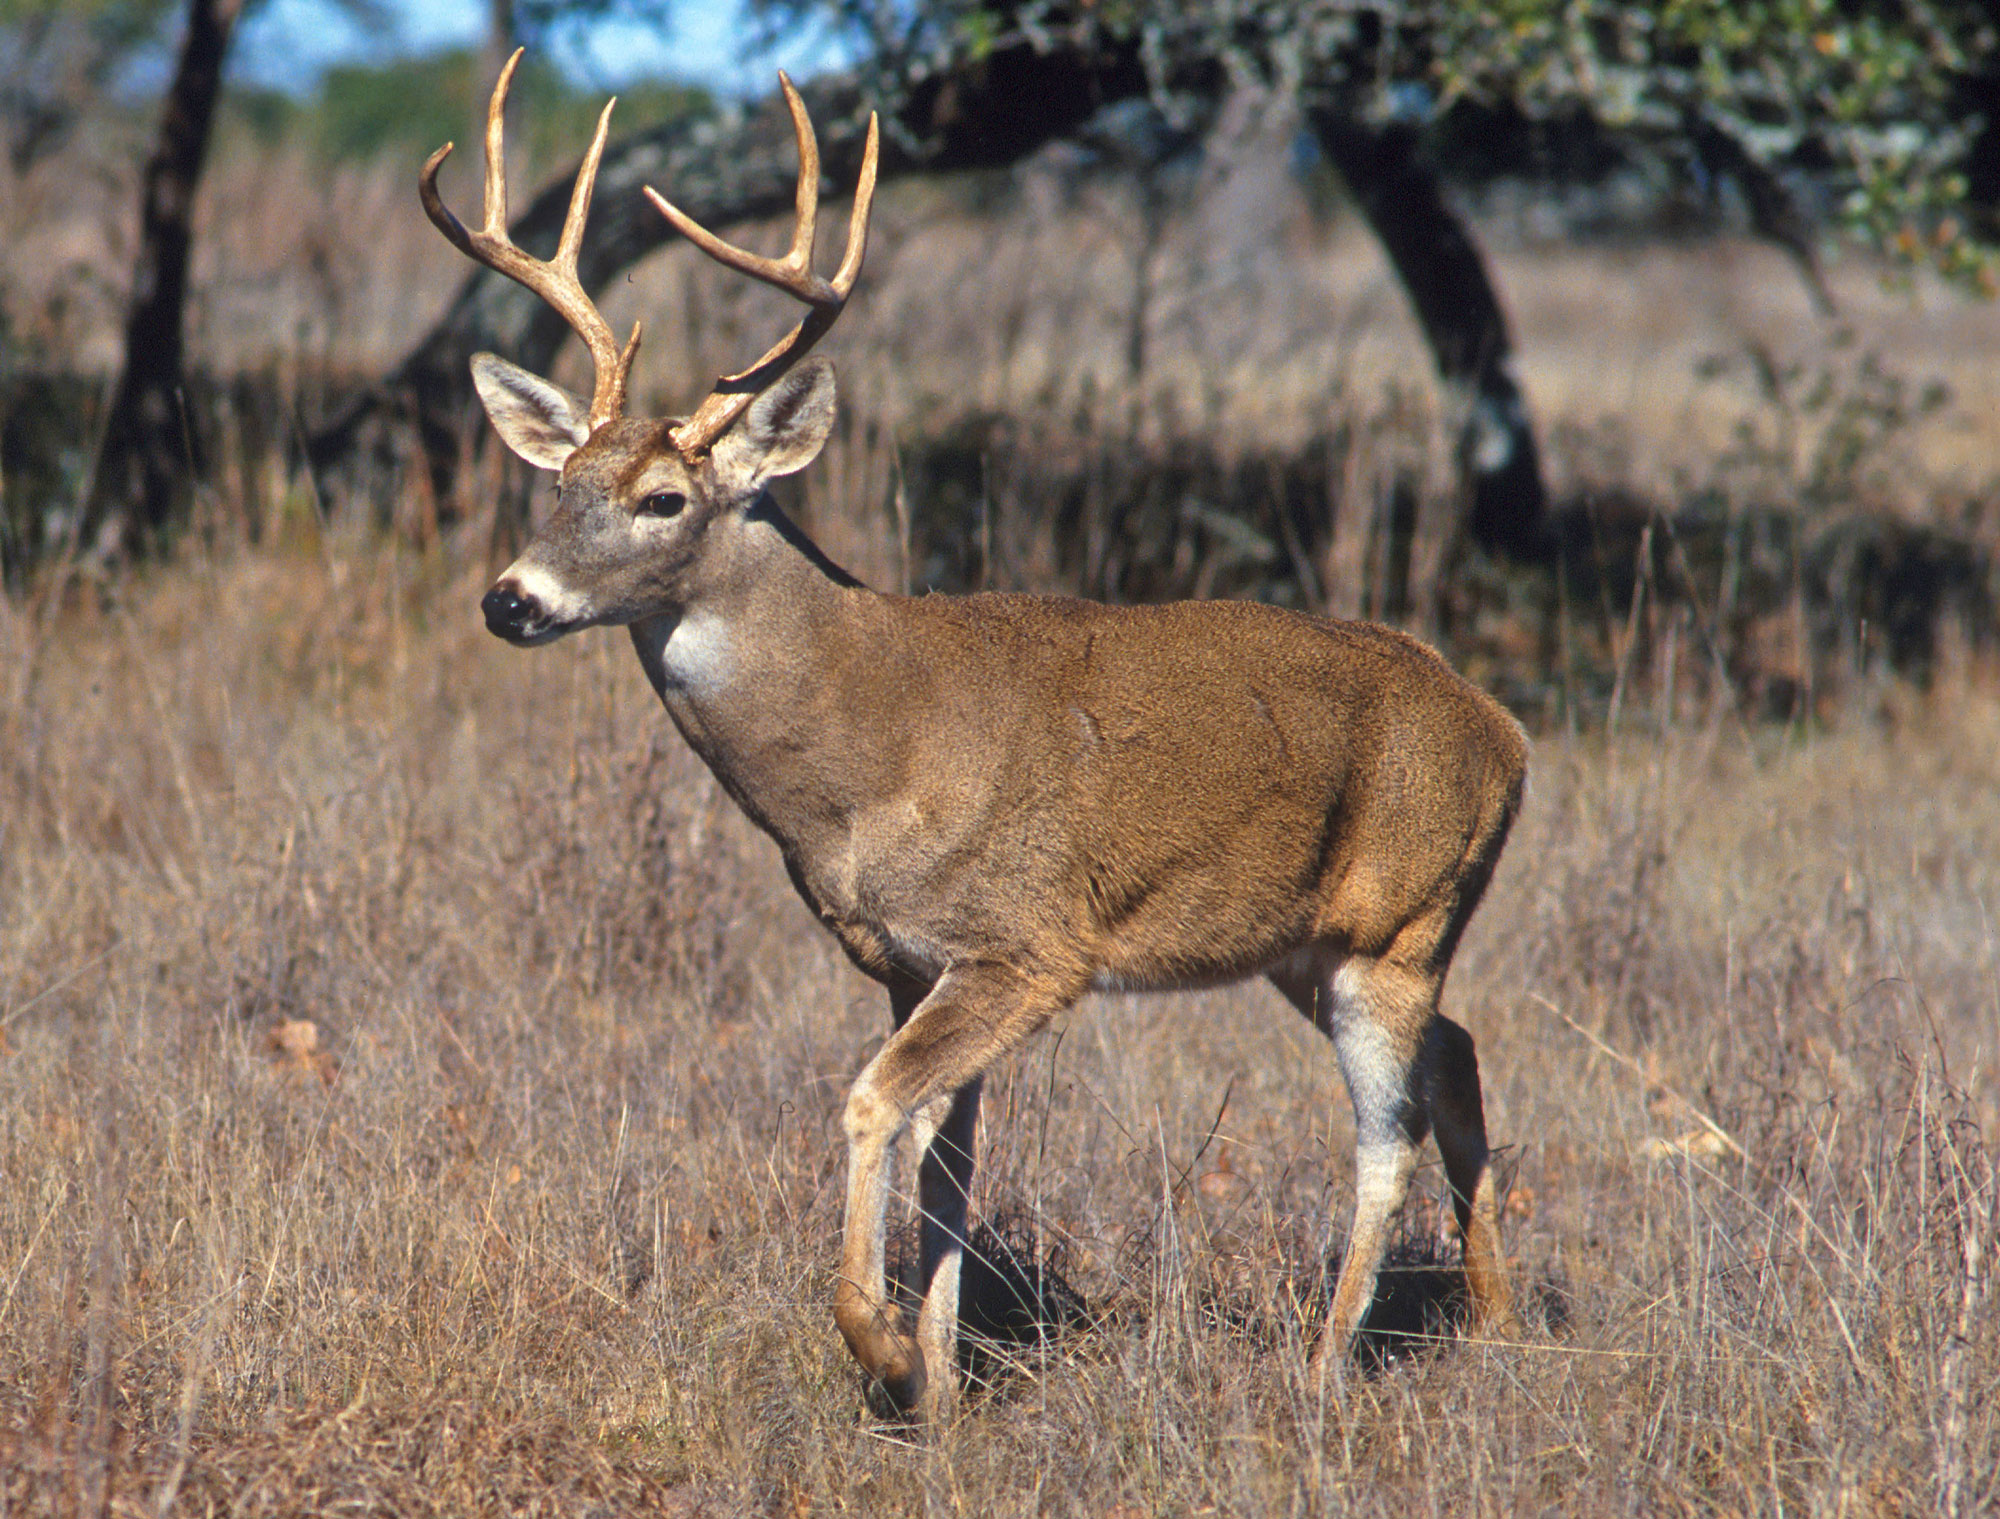 NIFA-Funded Study Detects Omicron Variant in White-Tailed Deer | USDA